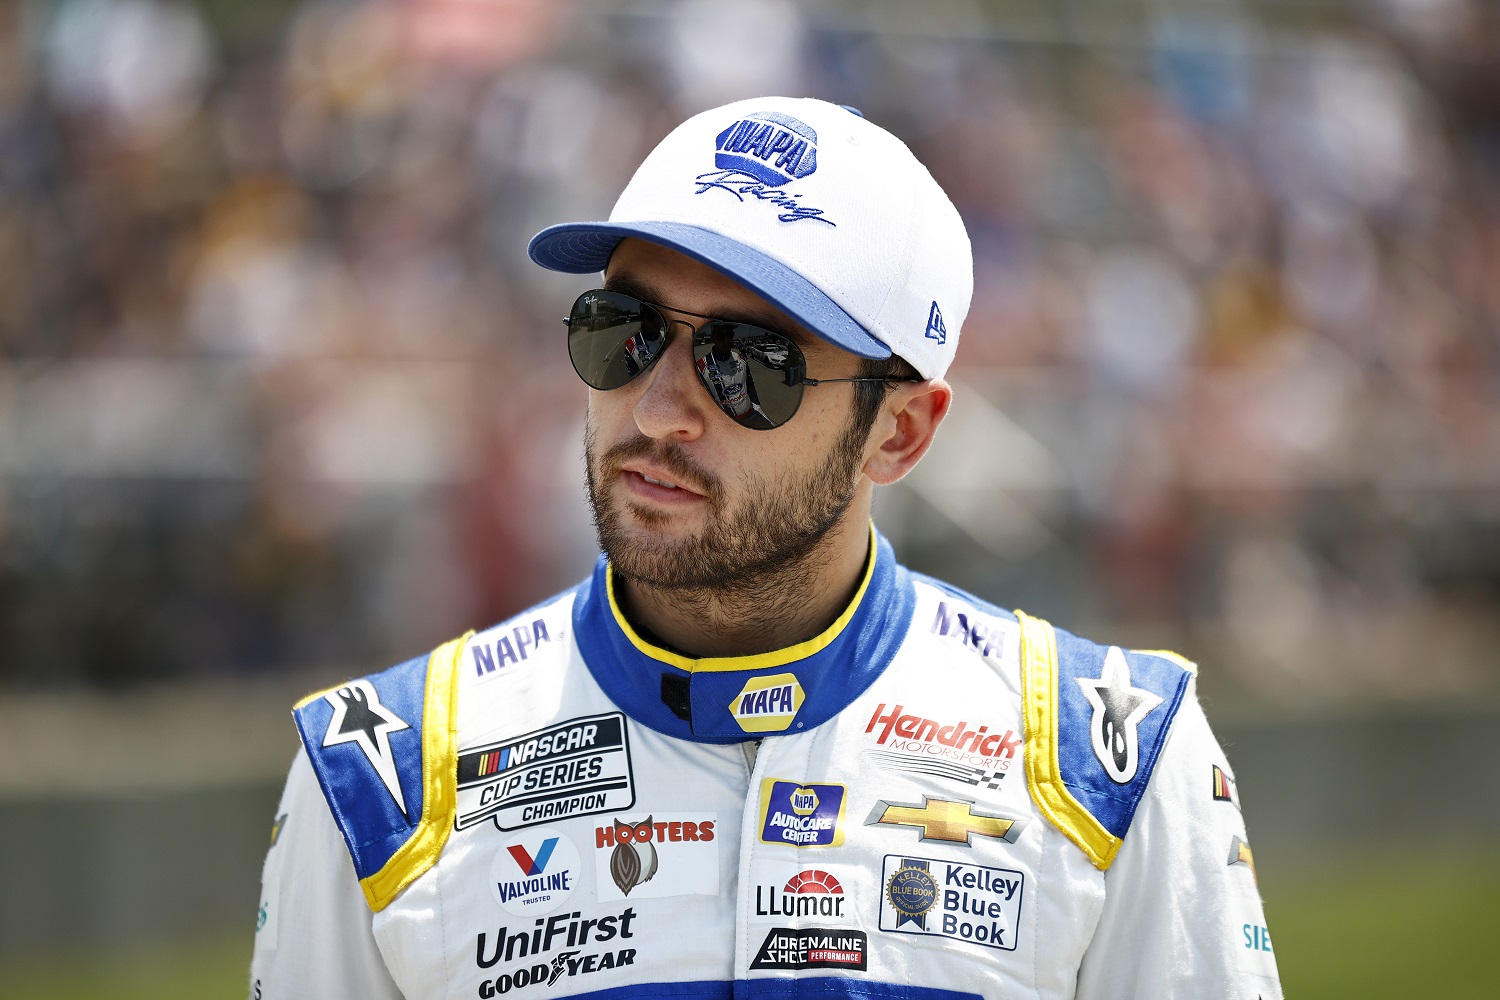 Chase Elliott, driver of the NAPA Auto Parts Chevrolet, waits on the grid prior to the NASCAR Cup Series race at Road America on July 4, 2021.